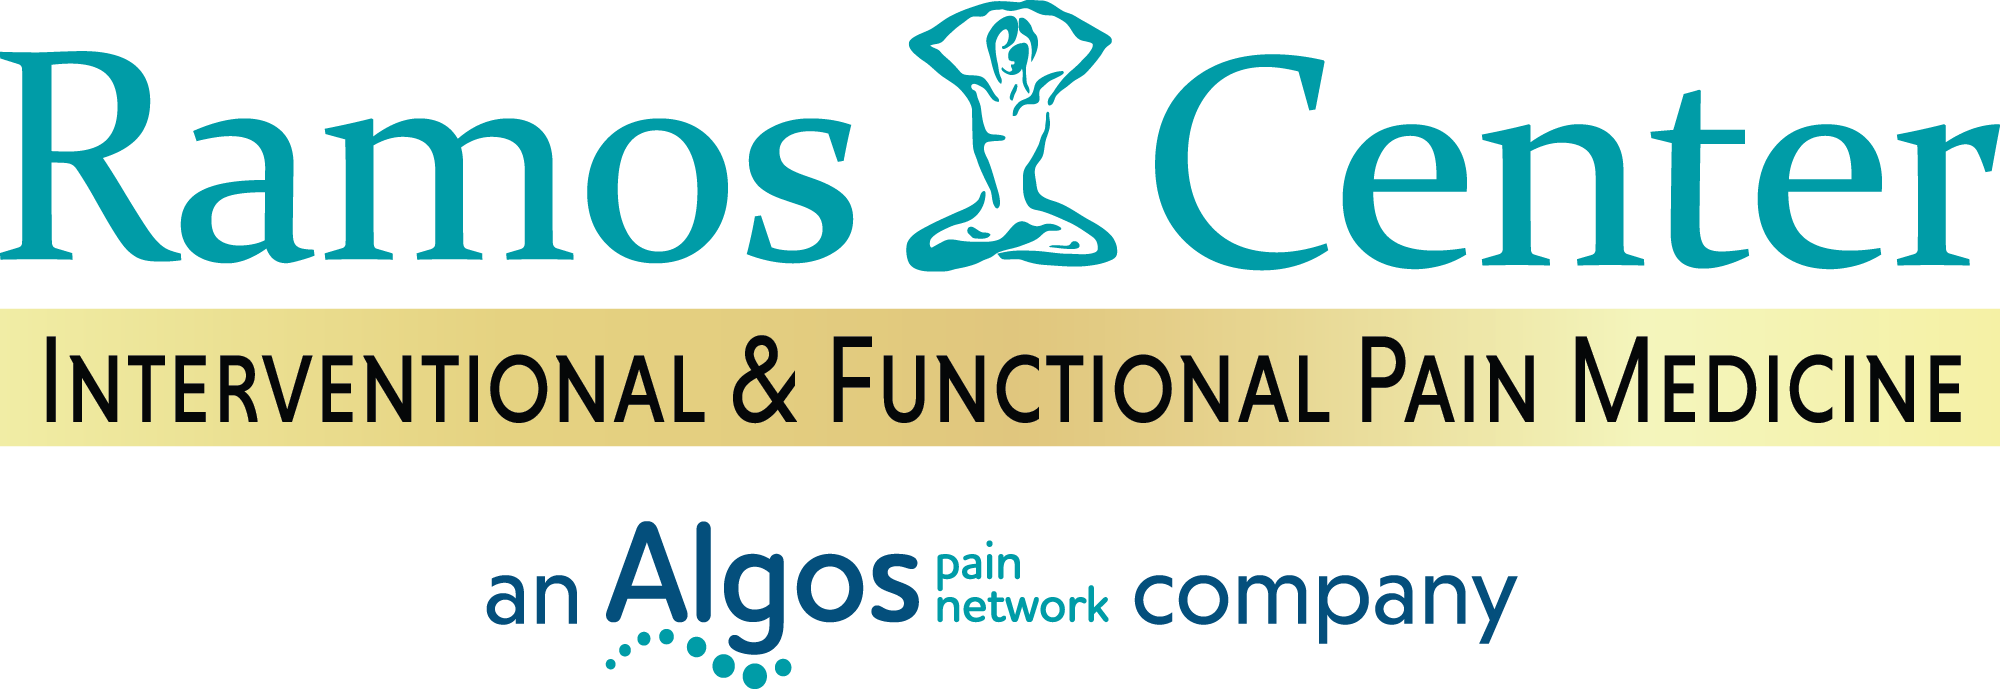 Ramos Center Interventional & Functional Pain Management